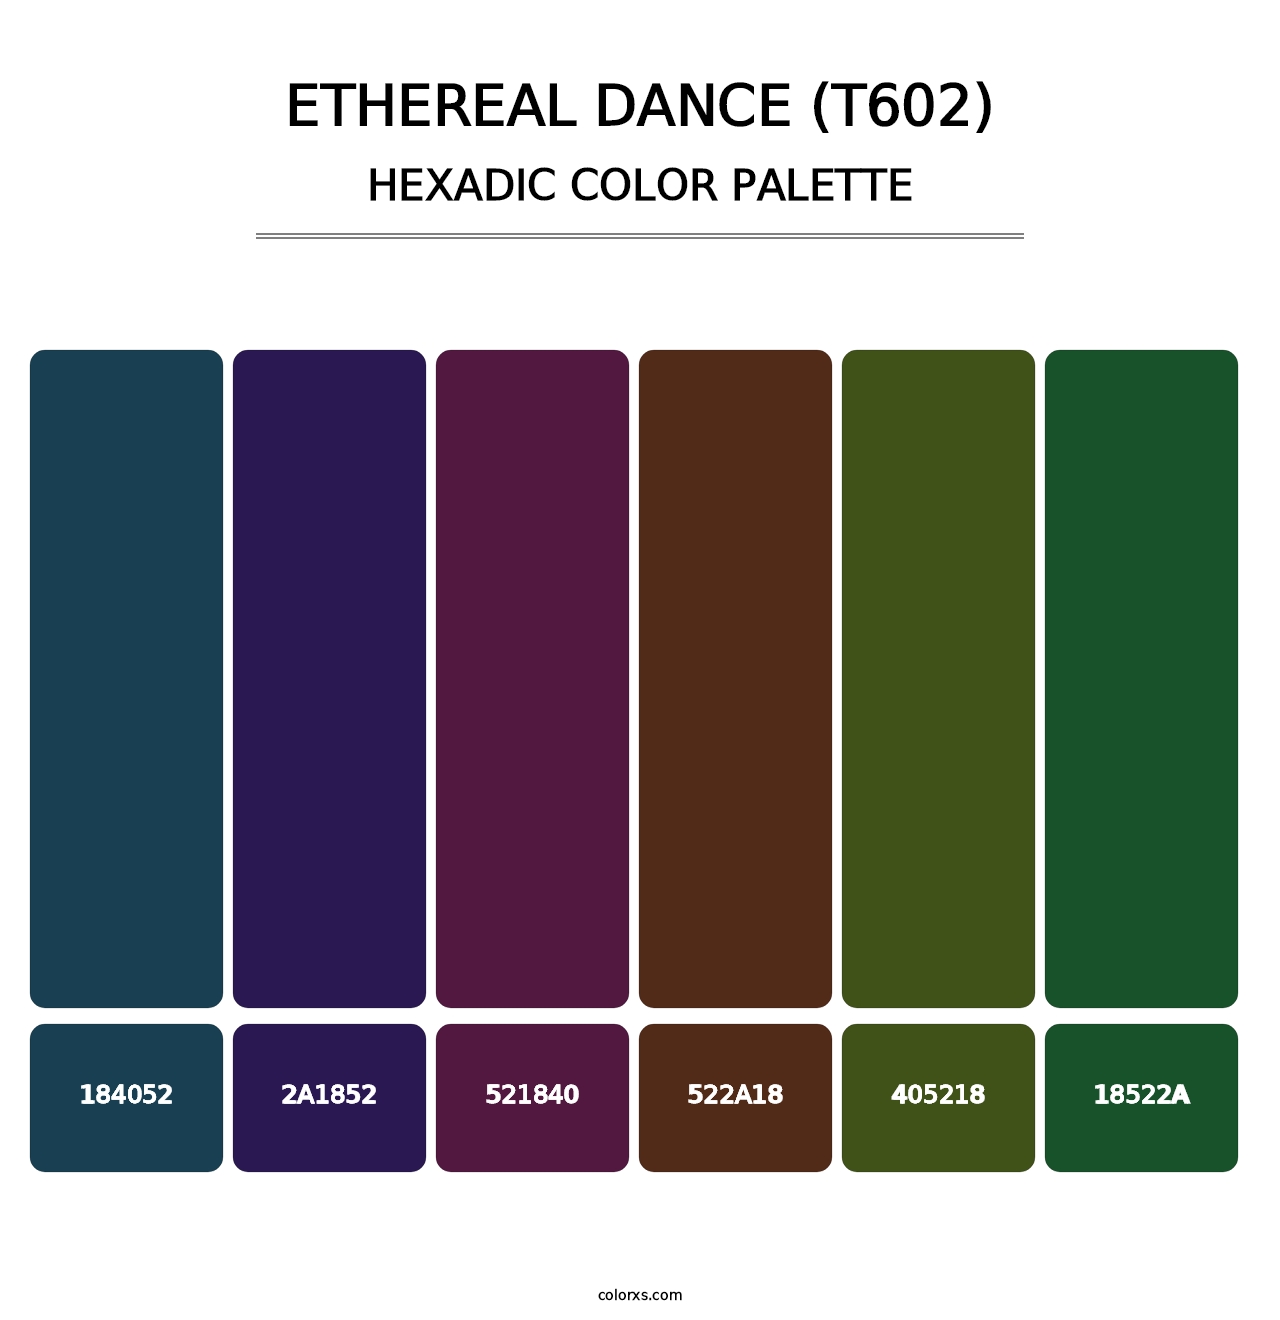 Ethereal Dance (T602) - Hexadic Color Palette